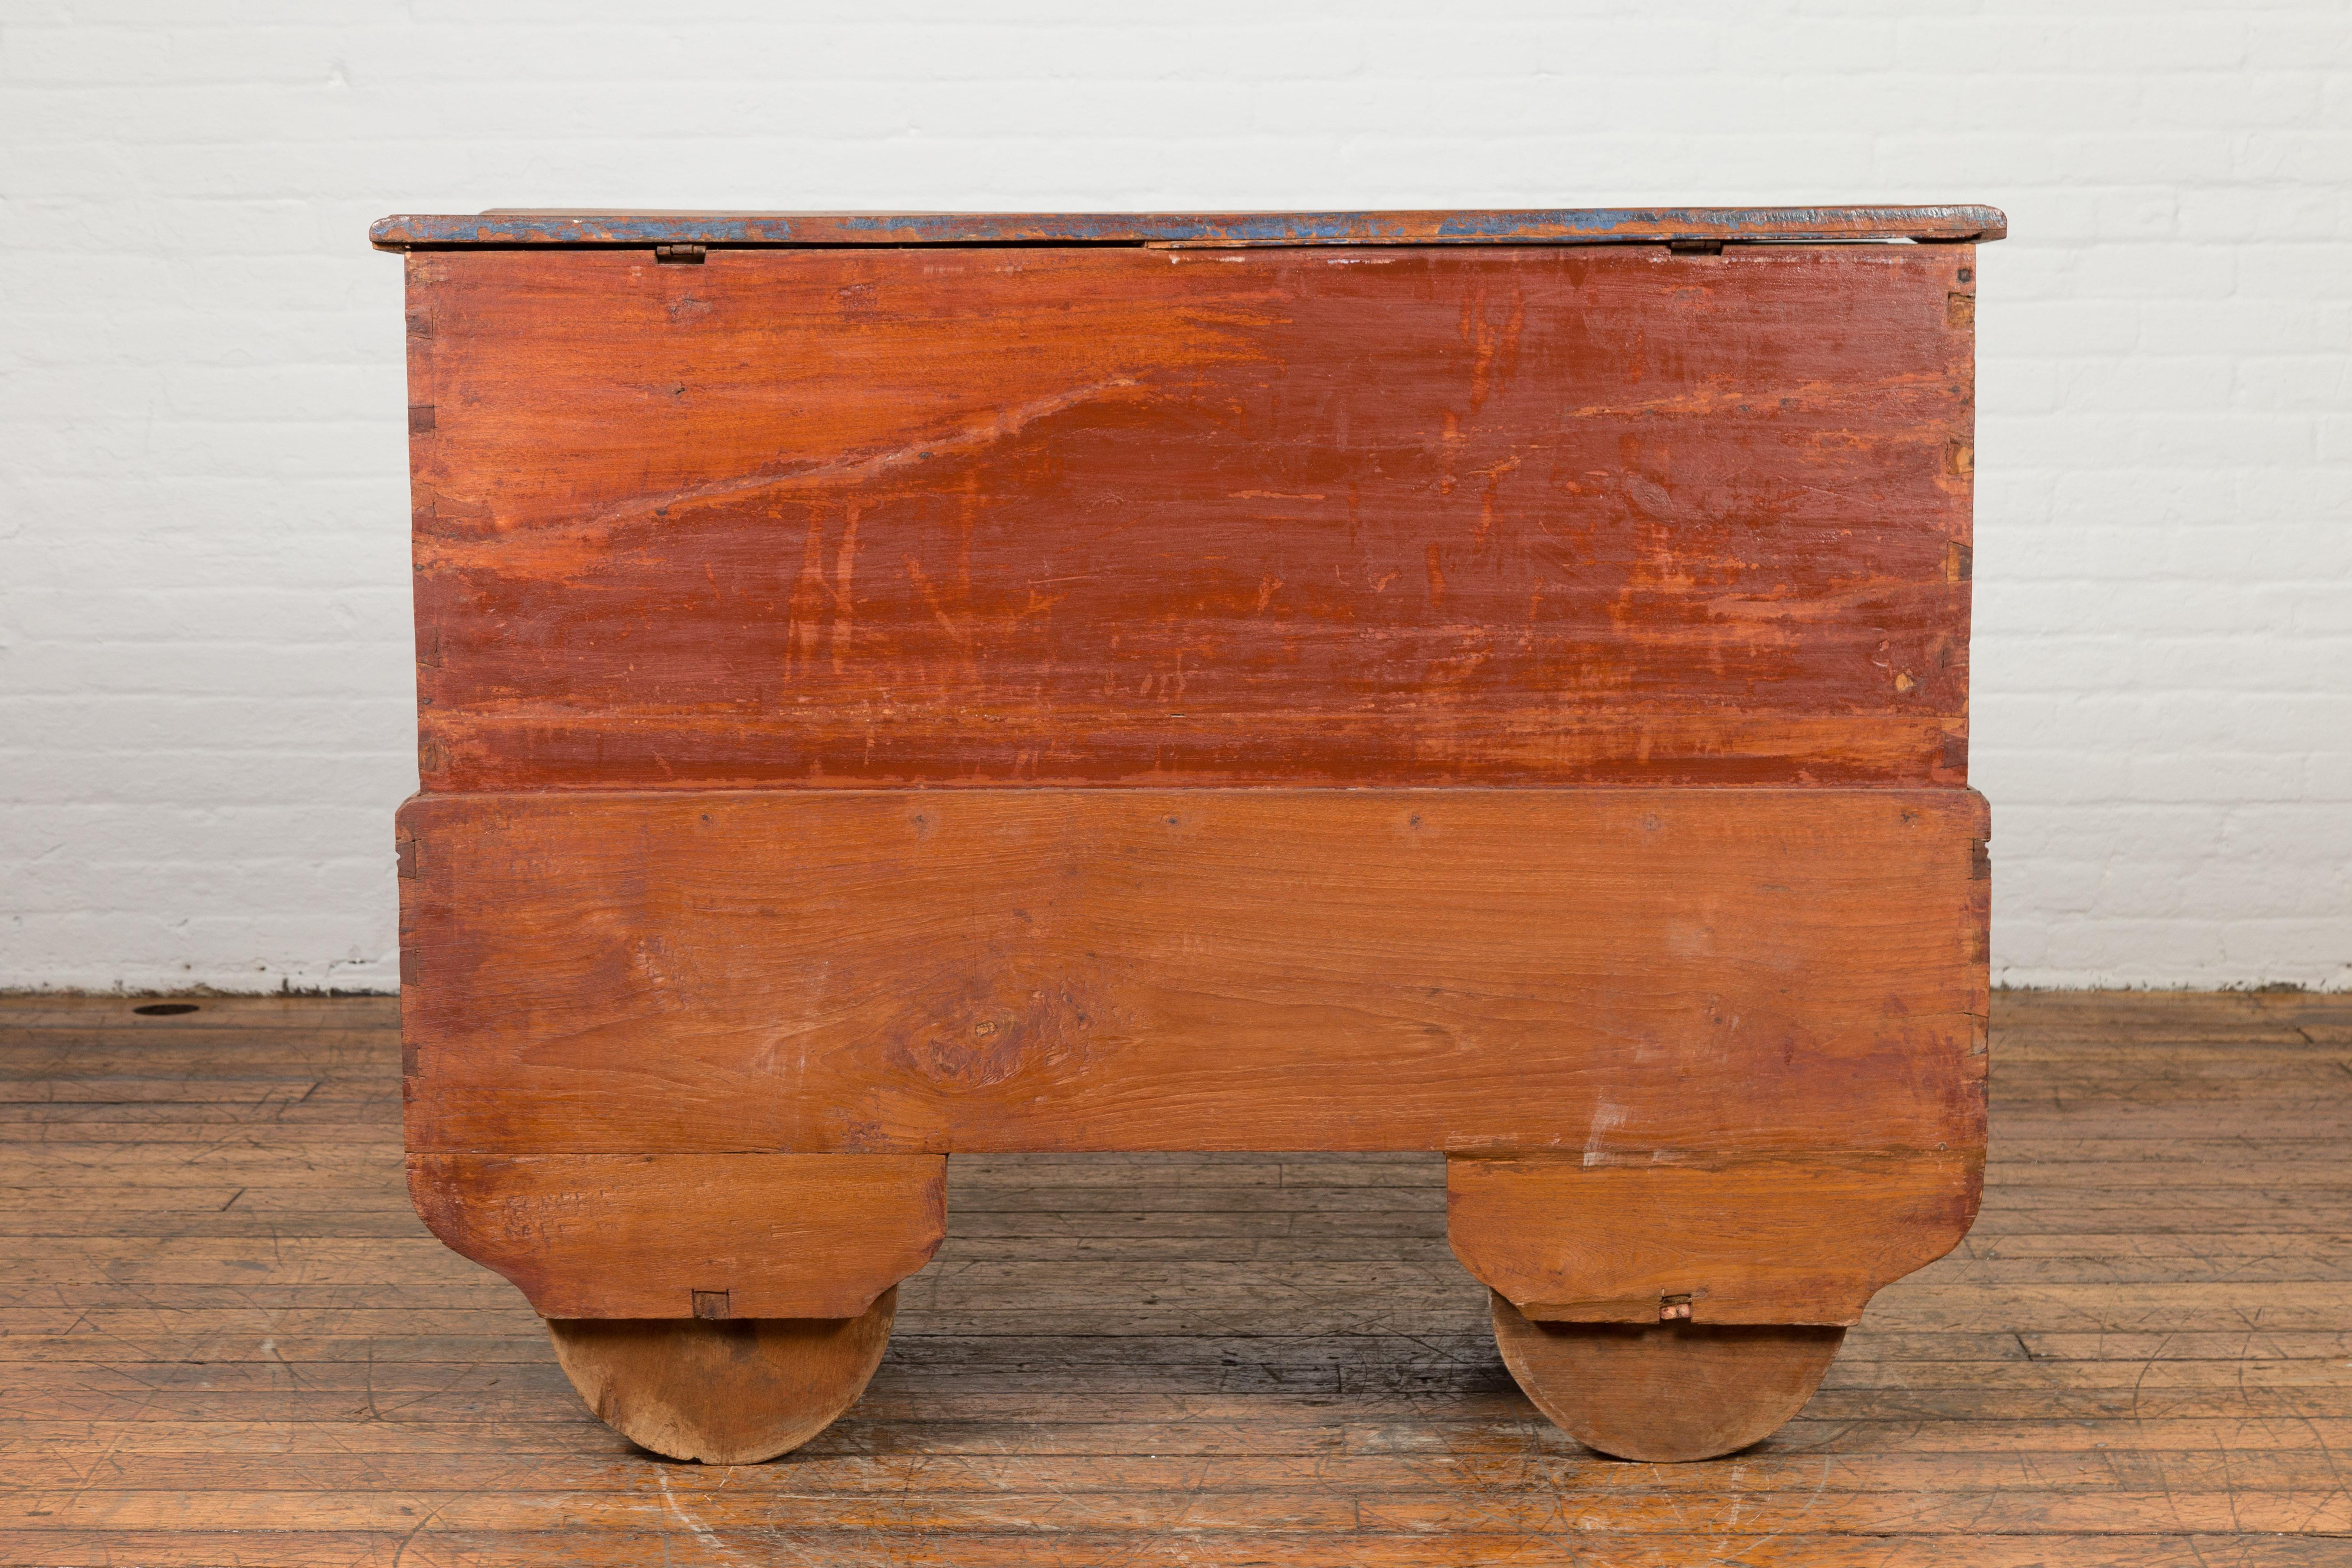 Indonesian Madurese 19th Century Polychrome Merchant's Blanket Chest on Wheels For Sale 8